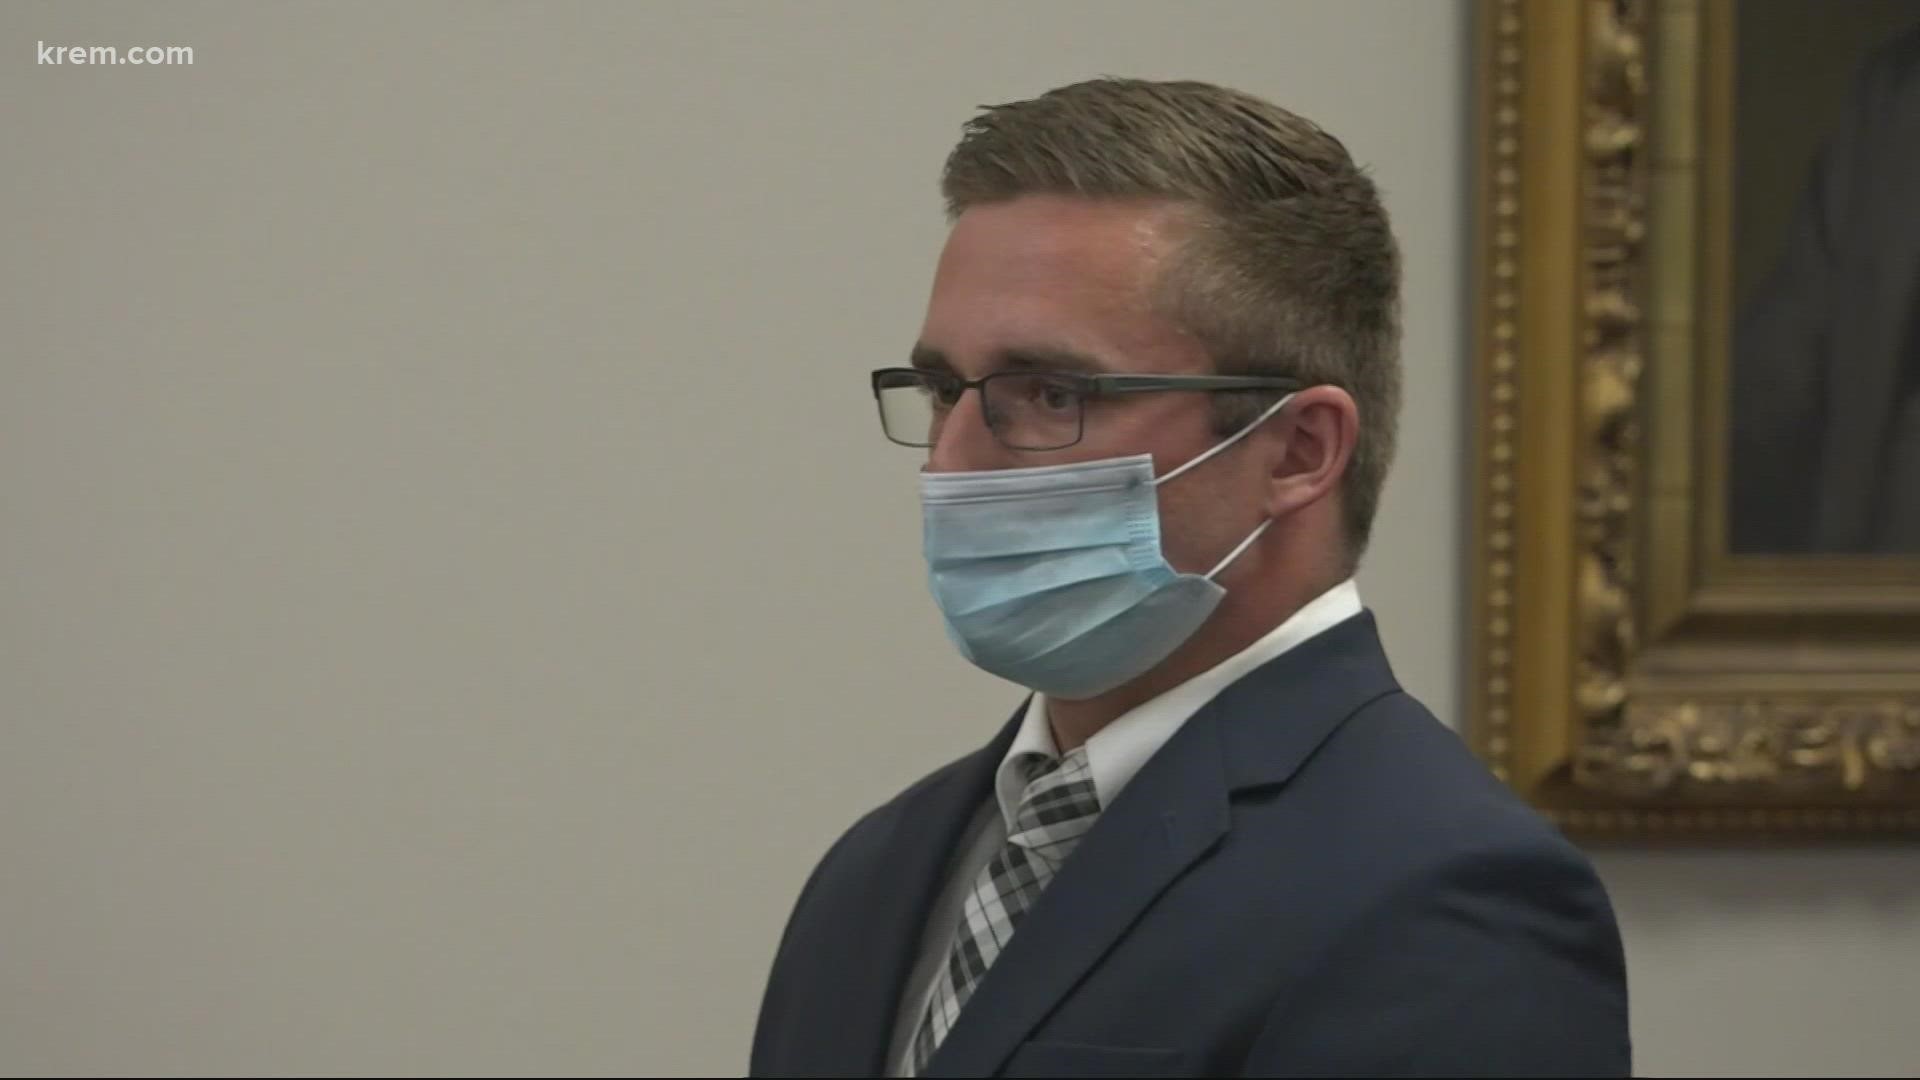 Officer Michael Brunner was fined $283 for his reckless driving that injured a married couple.